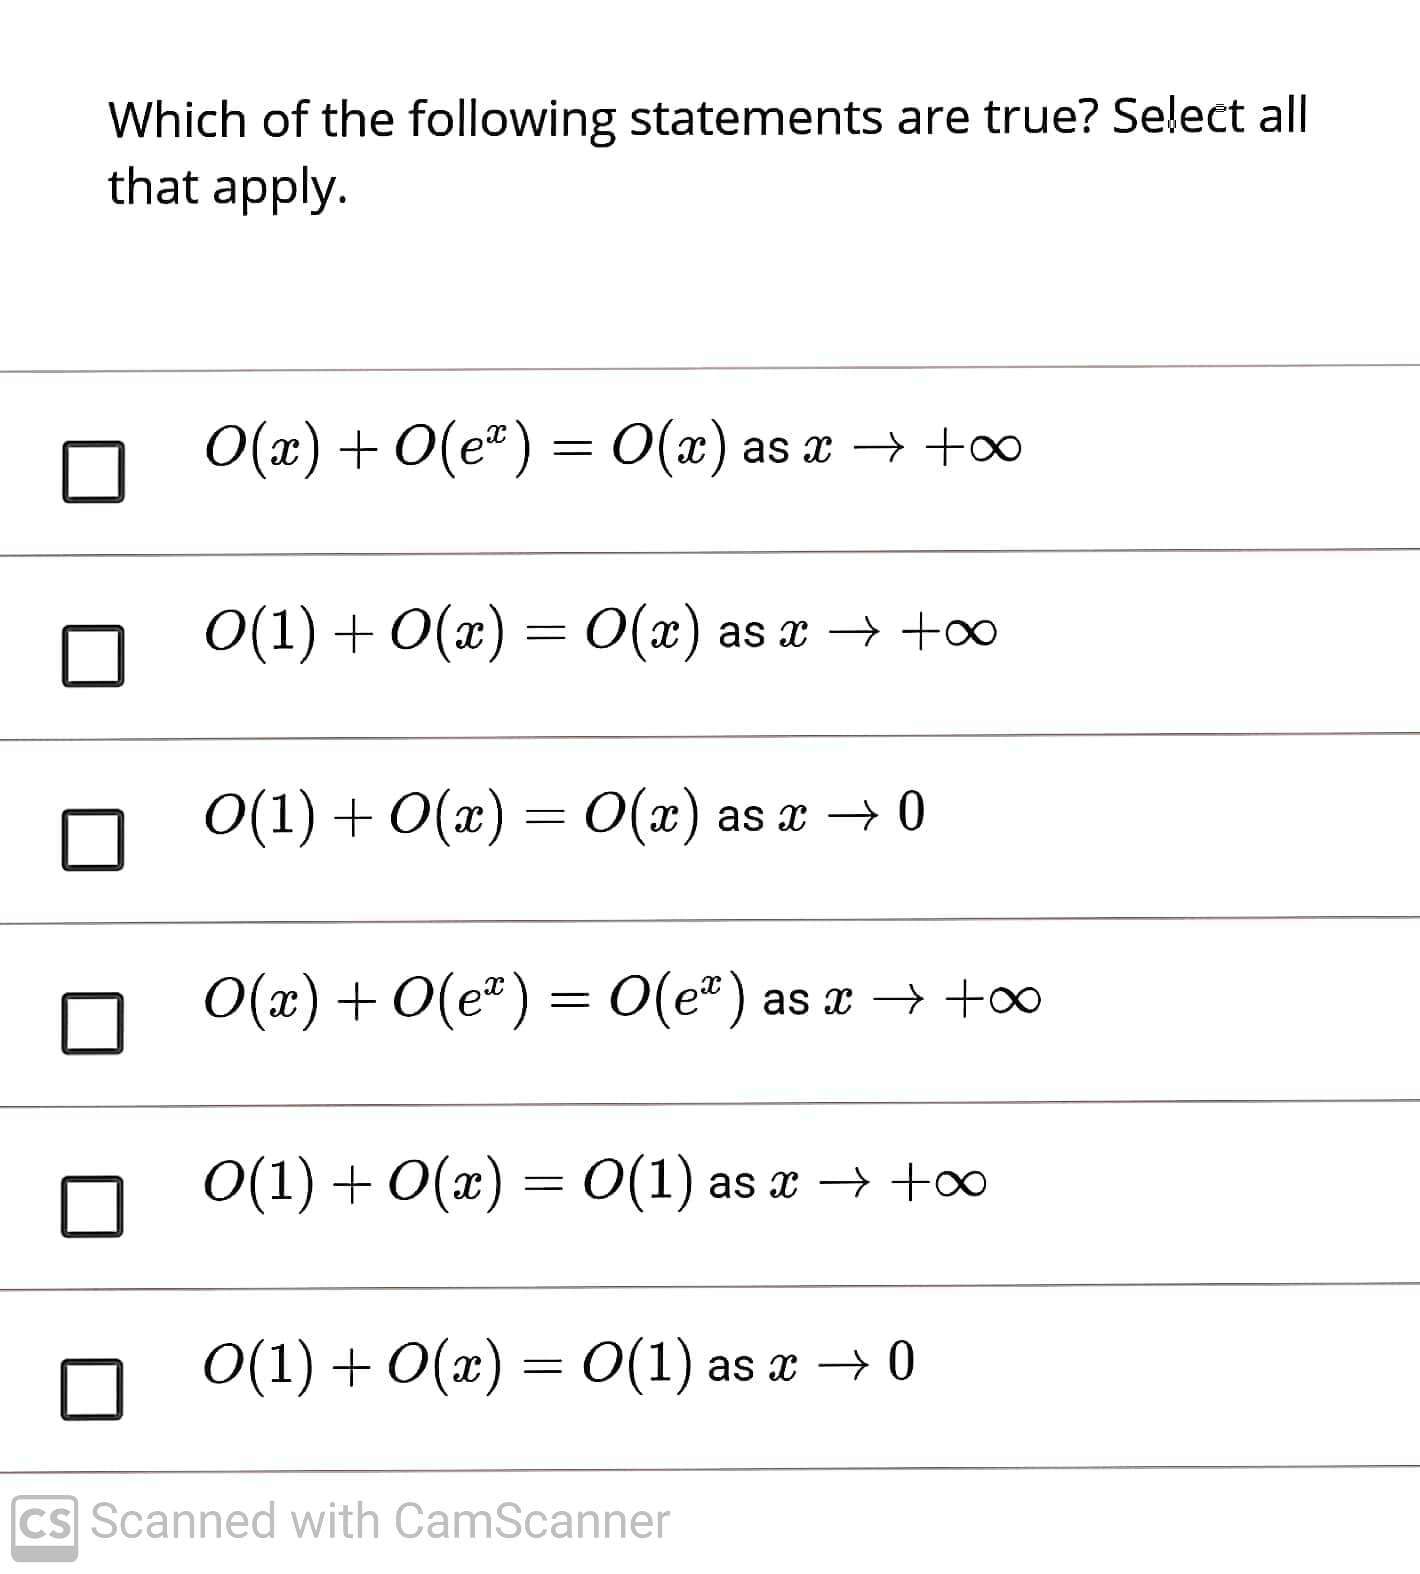 Which of the following statements are true? Select all
that apply.
O(x) + 0(e) = 0(x) as x → +∞
O(1) + 0(x) = 0(x) as x → +∞
О(1) + O(2) — О(") as a — 0
O(x)+ O(e")= 0(e*) as x → +∞
O(1) + 0(x) = 0(1) as x → +∞
- O(1) + O(x) = 0(1) as x → 0
